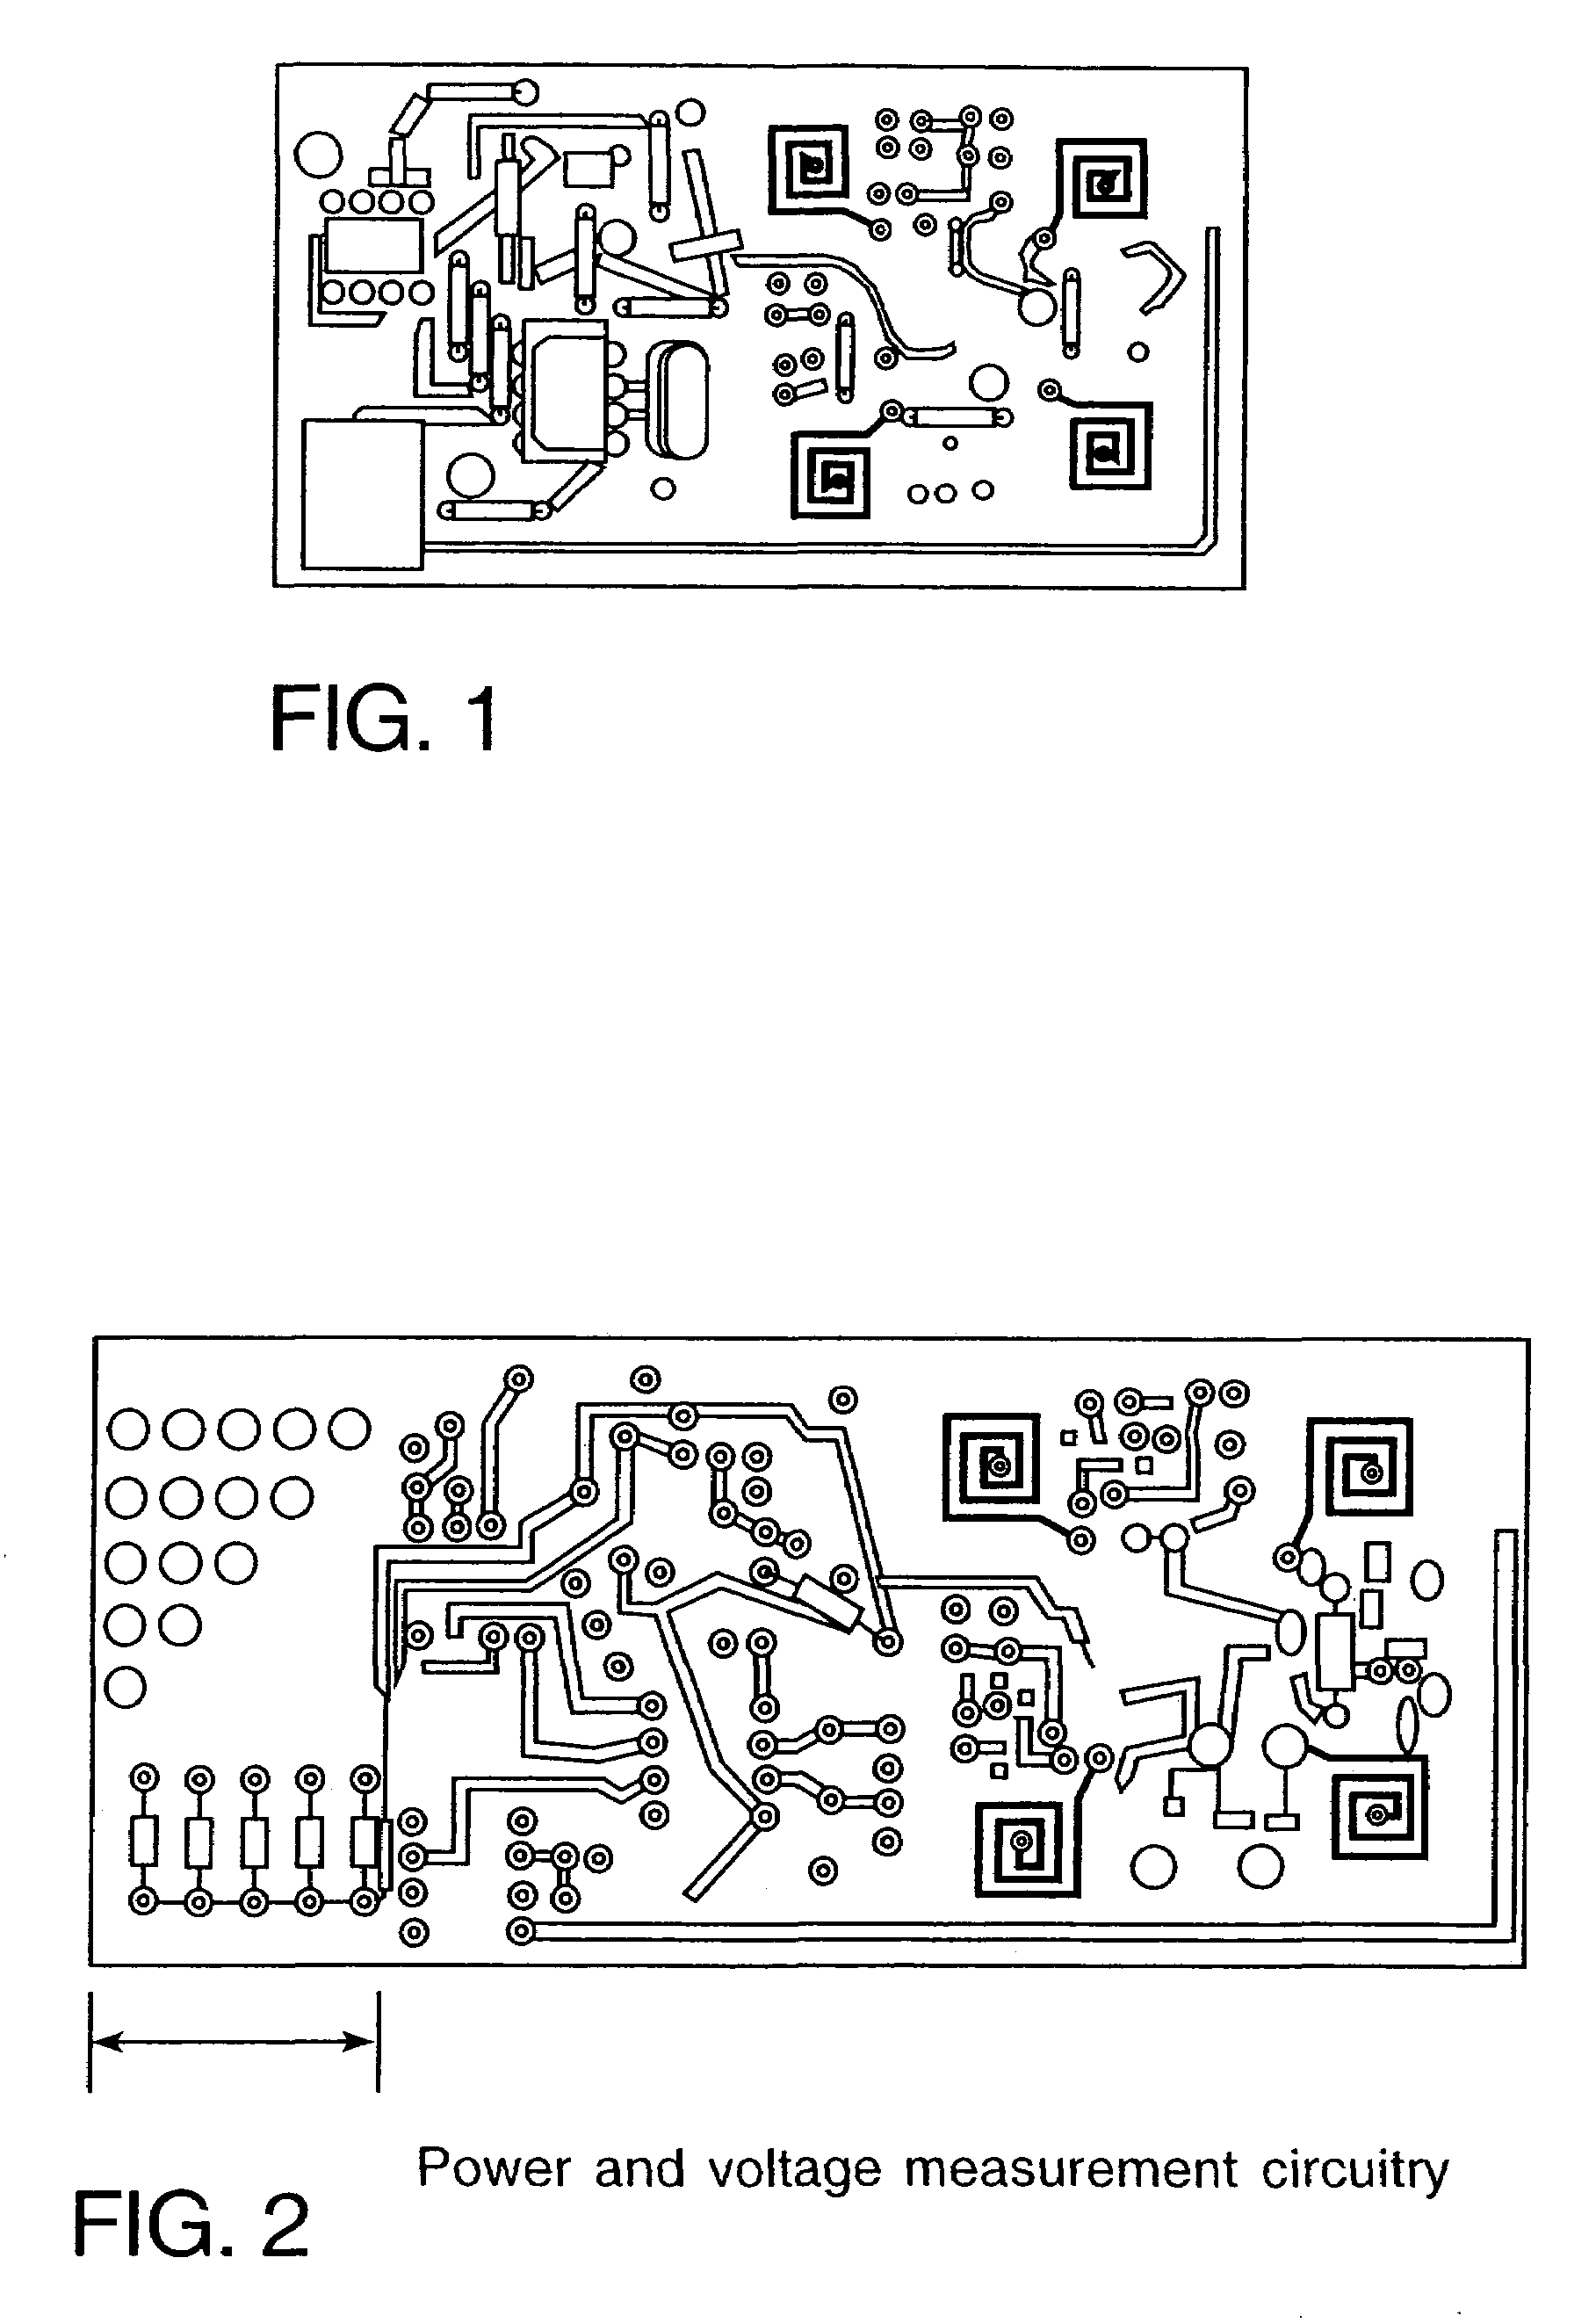 Antenna on a wireless untethered device such as a chip or printed circuit board for harvesting energy from space